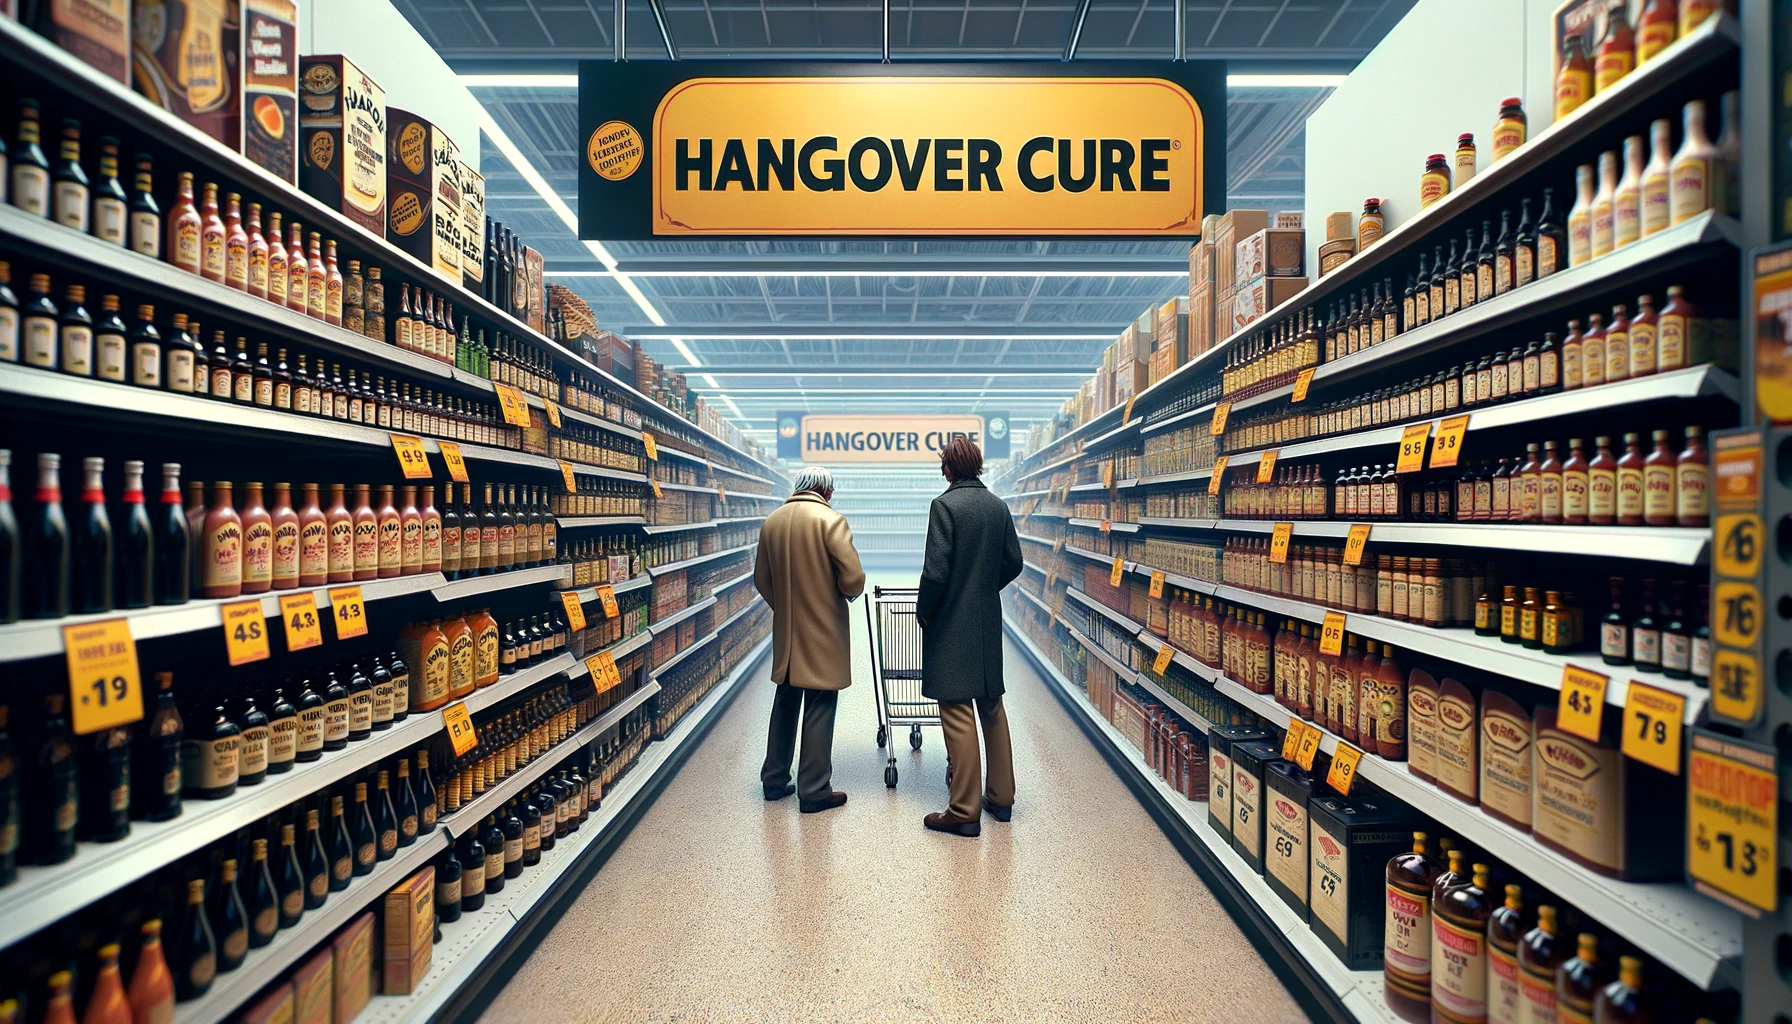 all-hangover-cures-are-alcoholic-csdn